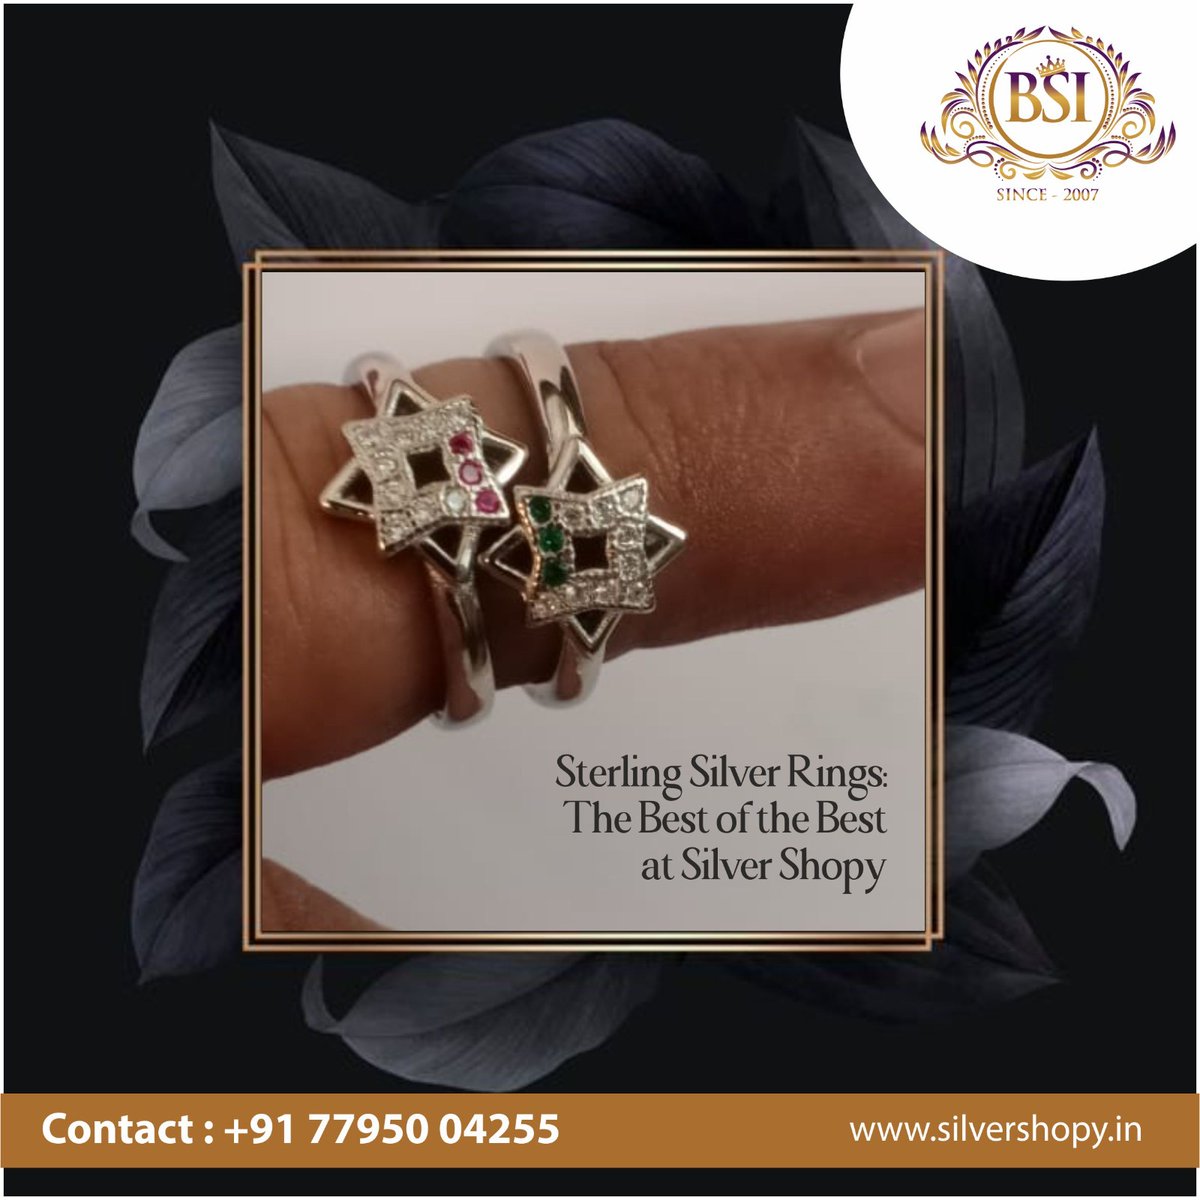 Discover the epitome of elegance with our exquisite Sterling Silver rings at 'Silver Shoppy.' Elevate your style with timeless beauty.

📞 Reach us at +91 7795004255 for personalized assistance or 🌐 visit our website silvershopy.in

#SterlingSilverJewelry #ShopSilver